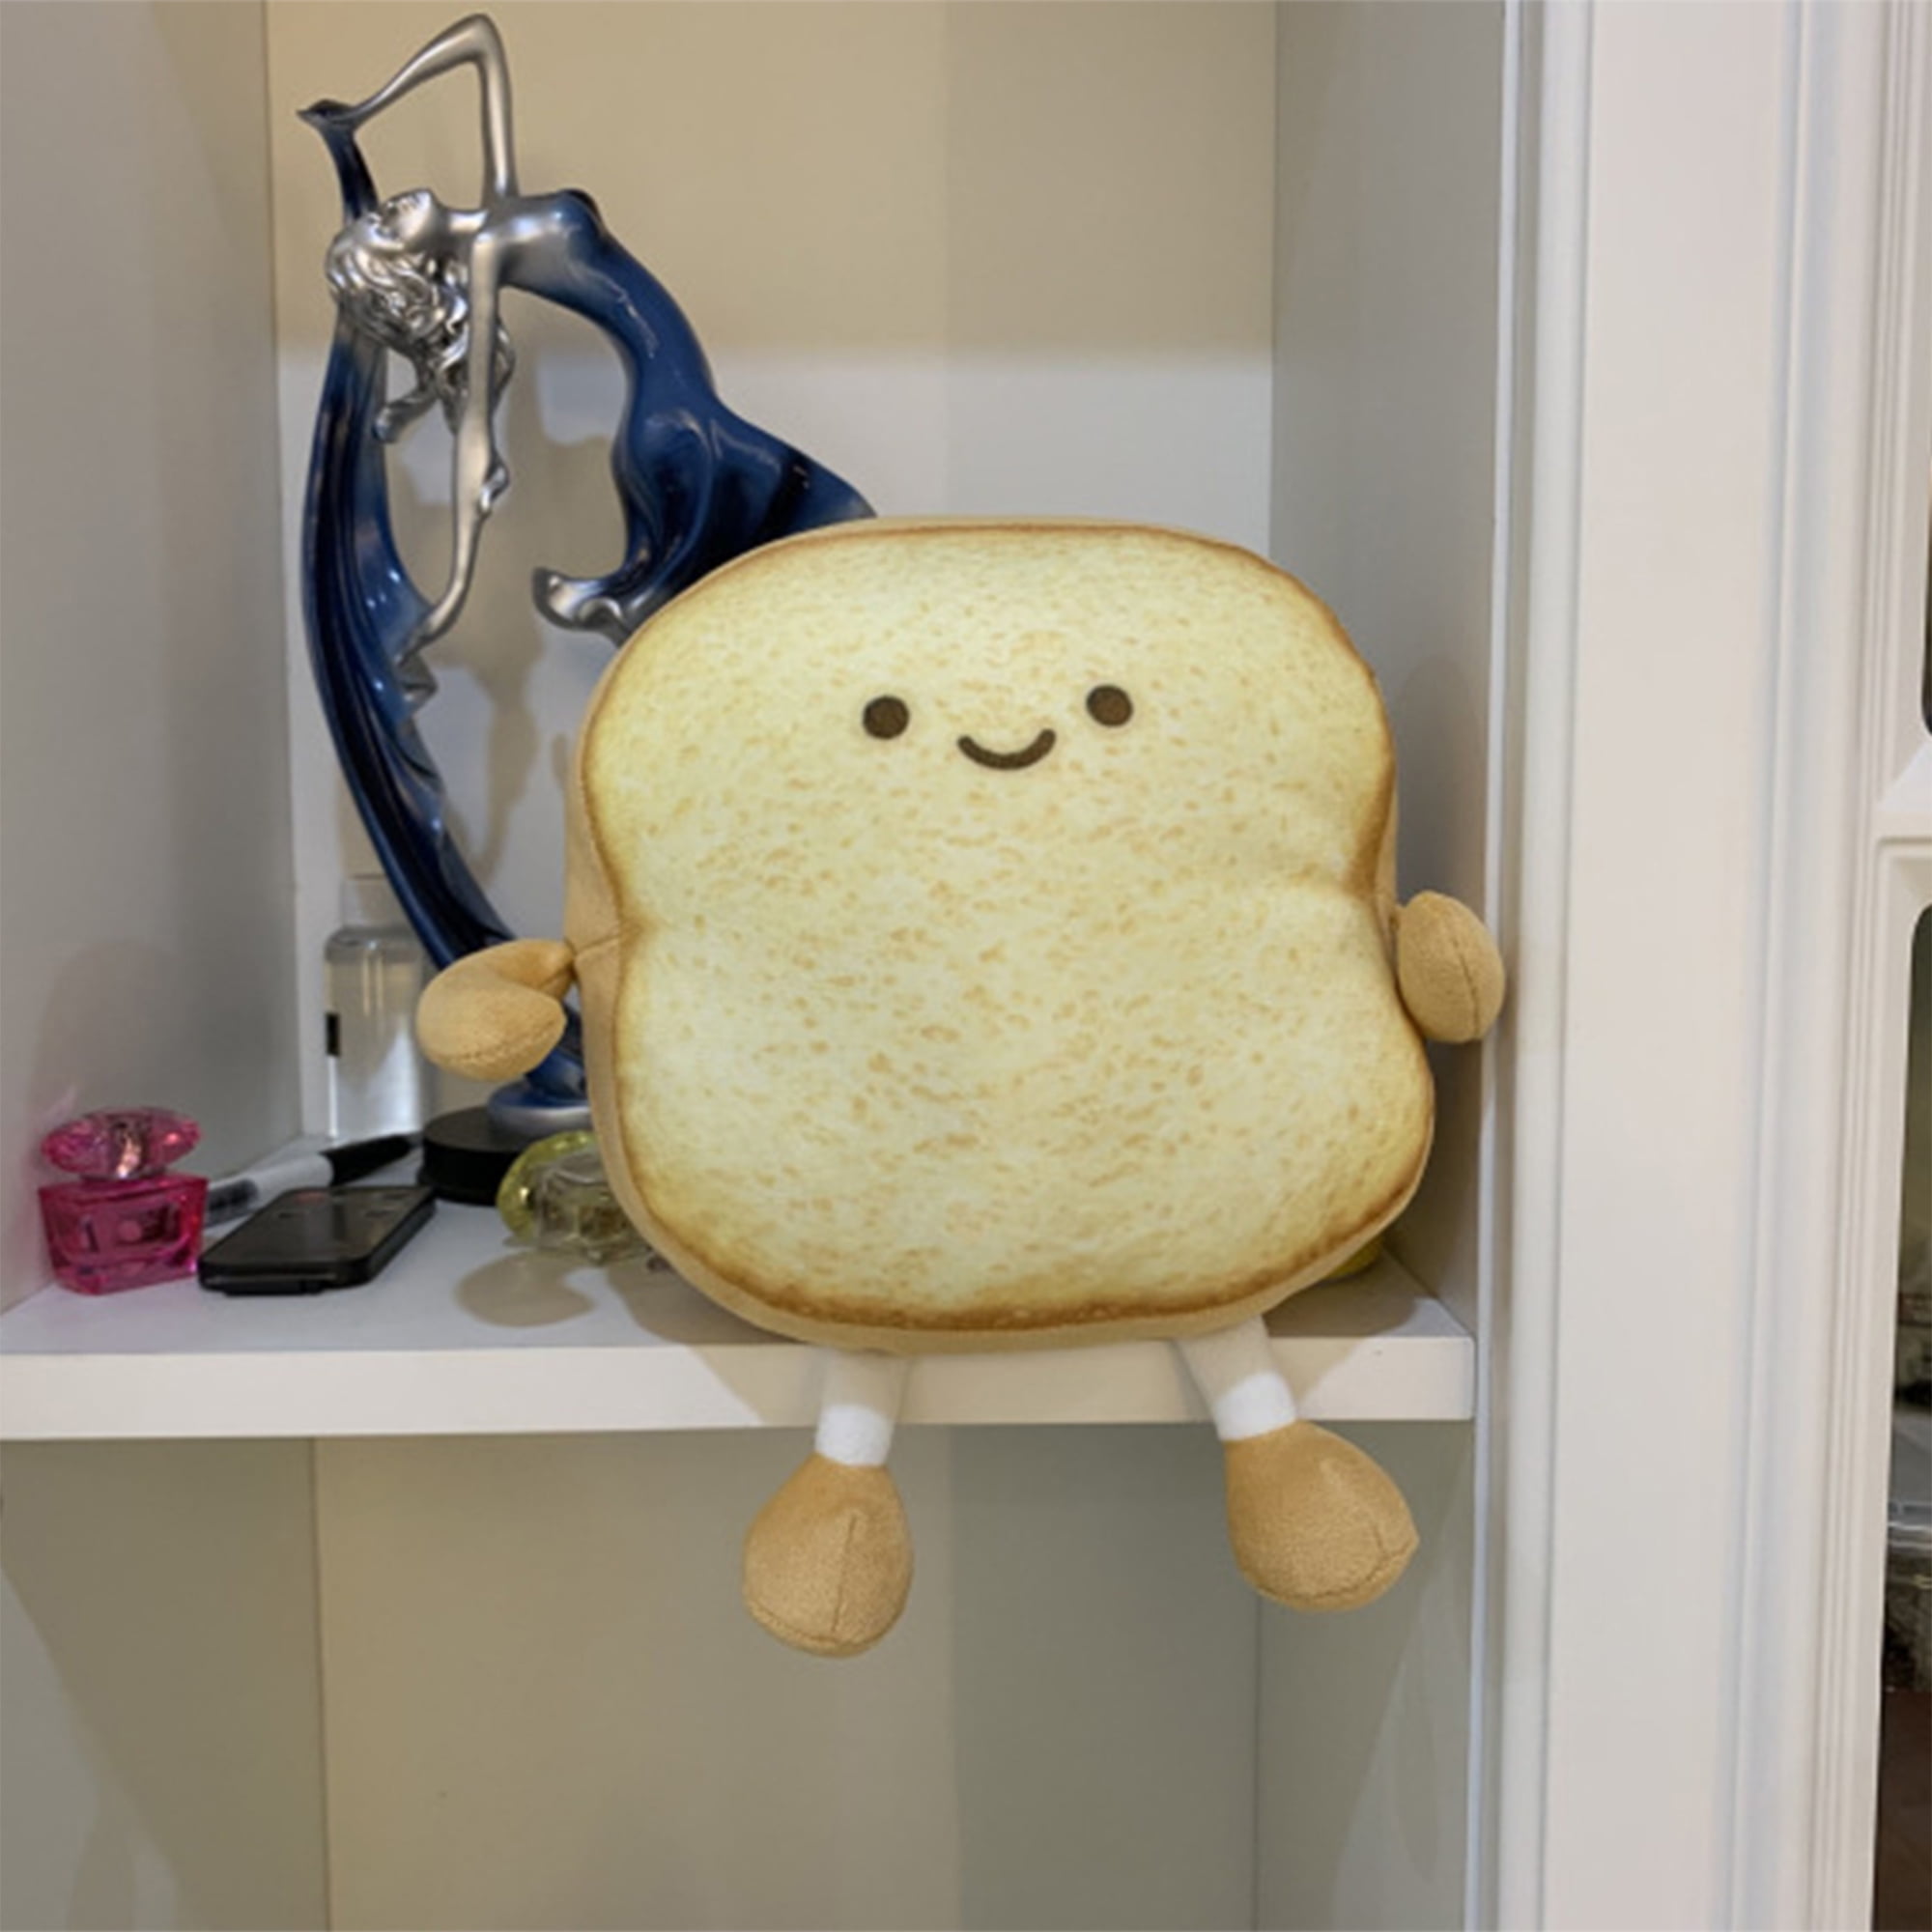 Bread Toast Cushion Chair Pad Decoration Memory Stuffed PP Food Pillow Seat Cushion for Bedroom Restaurant Valentine Adults Kids B, Size